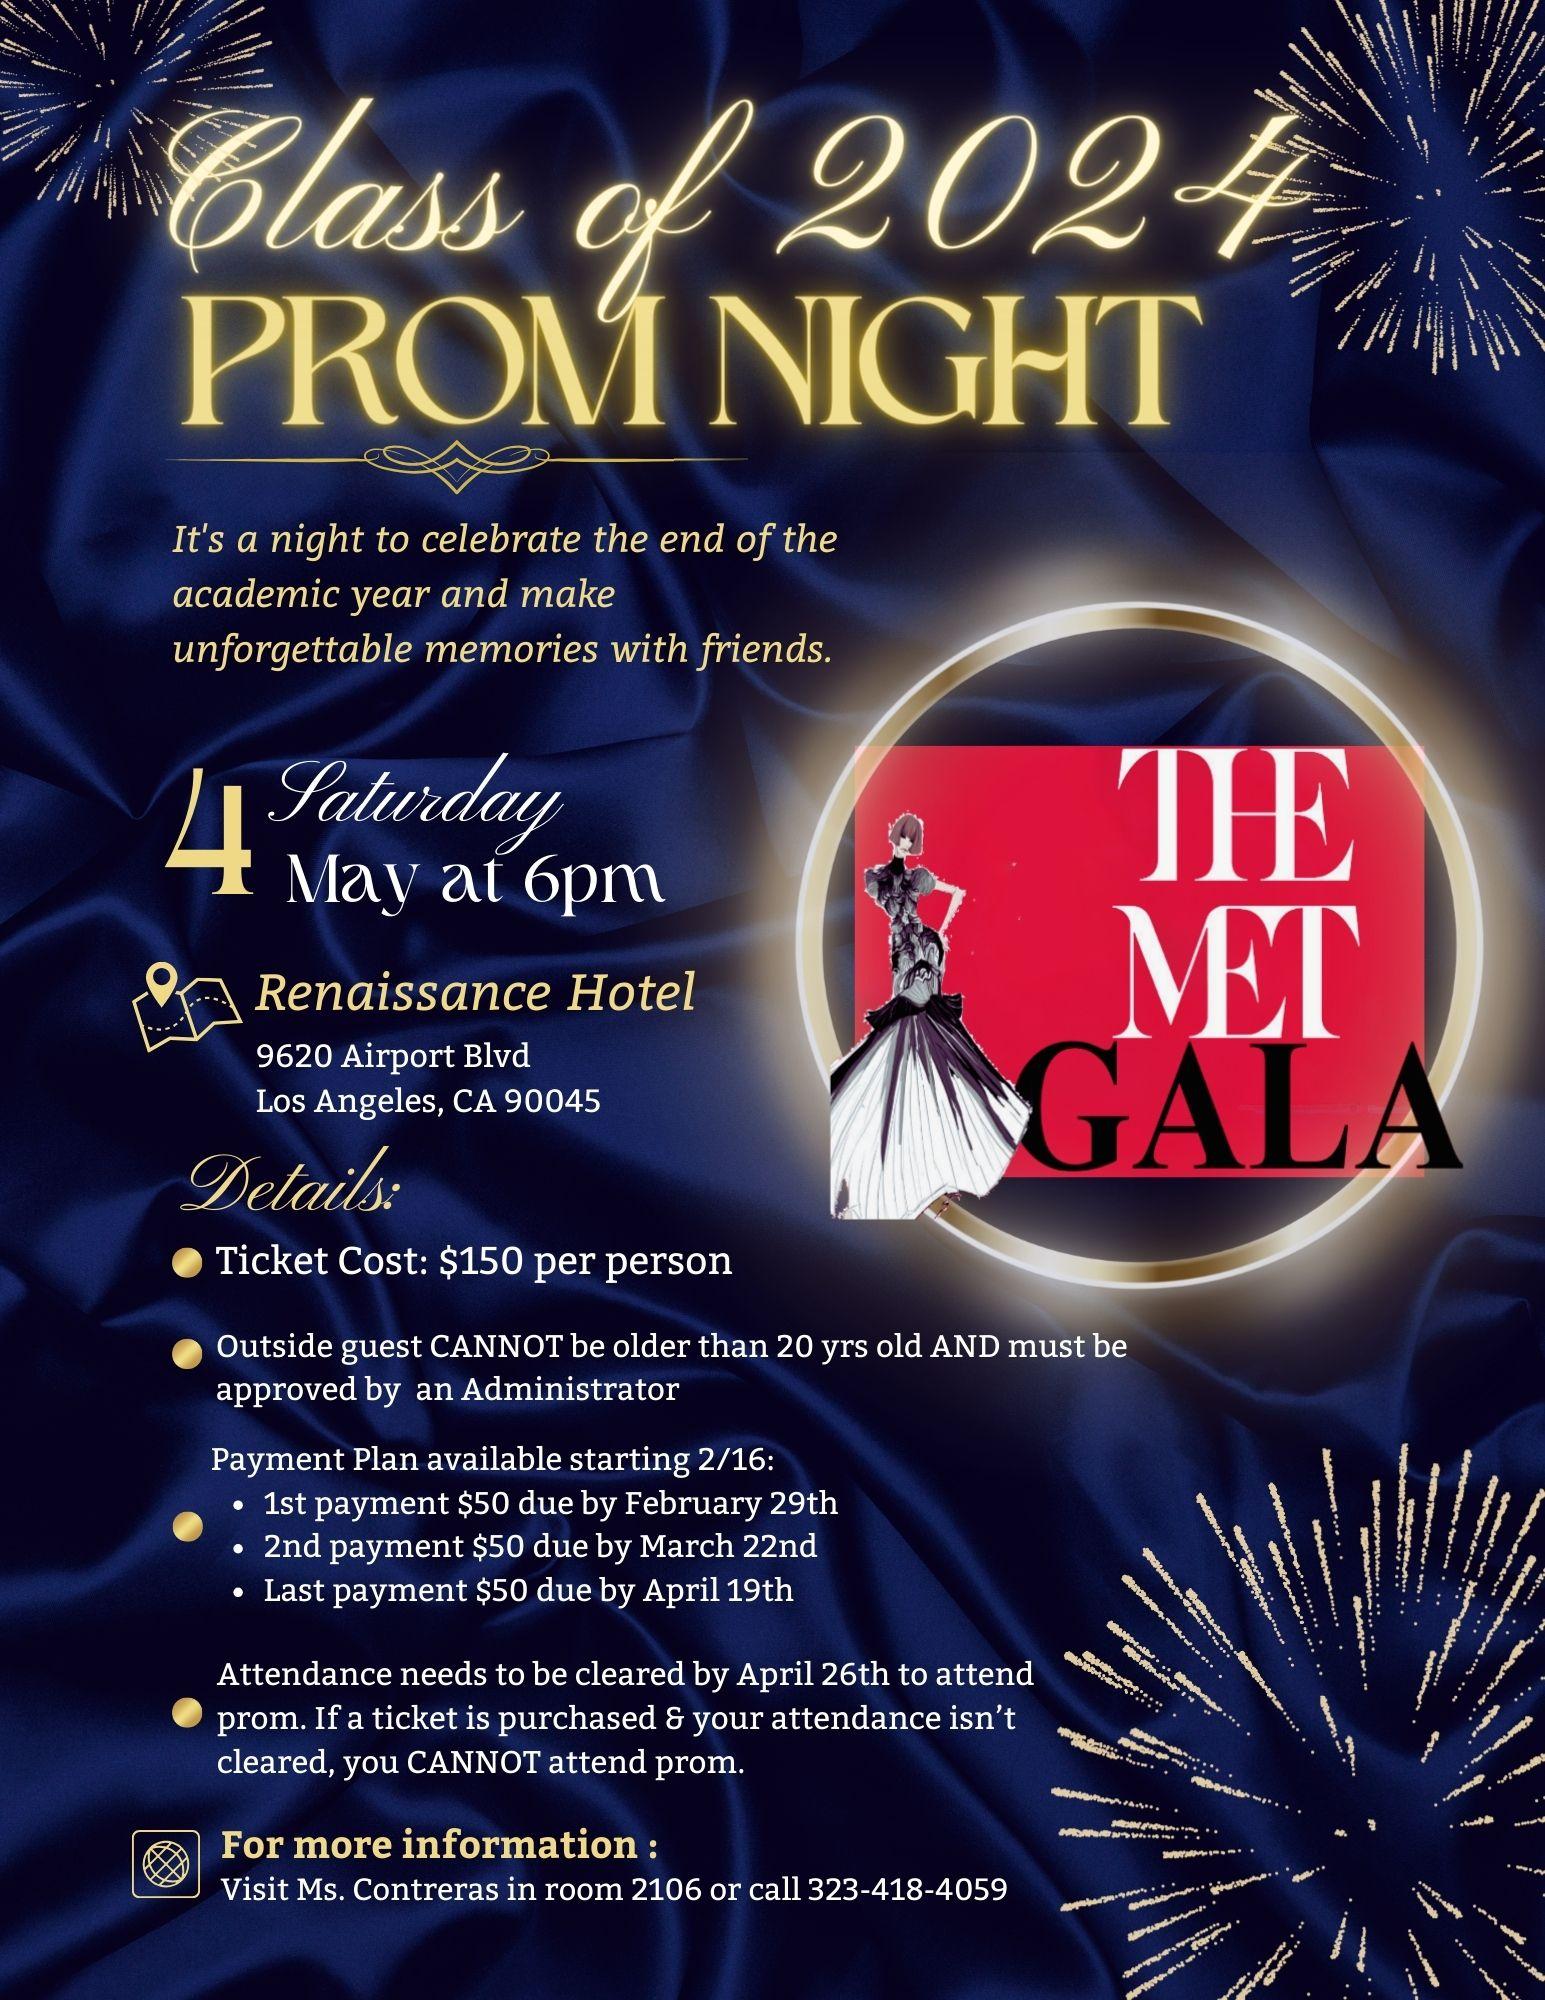 Prom flyer showing time, place, cost, guidelines